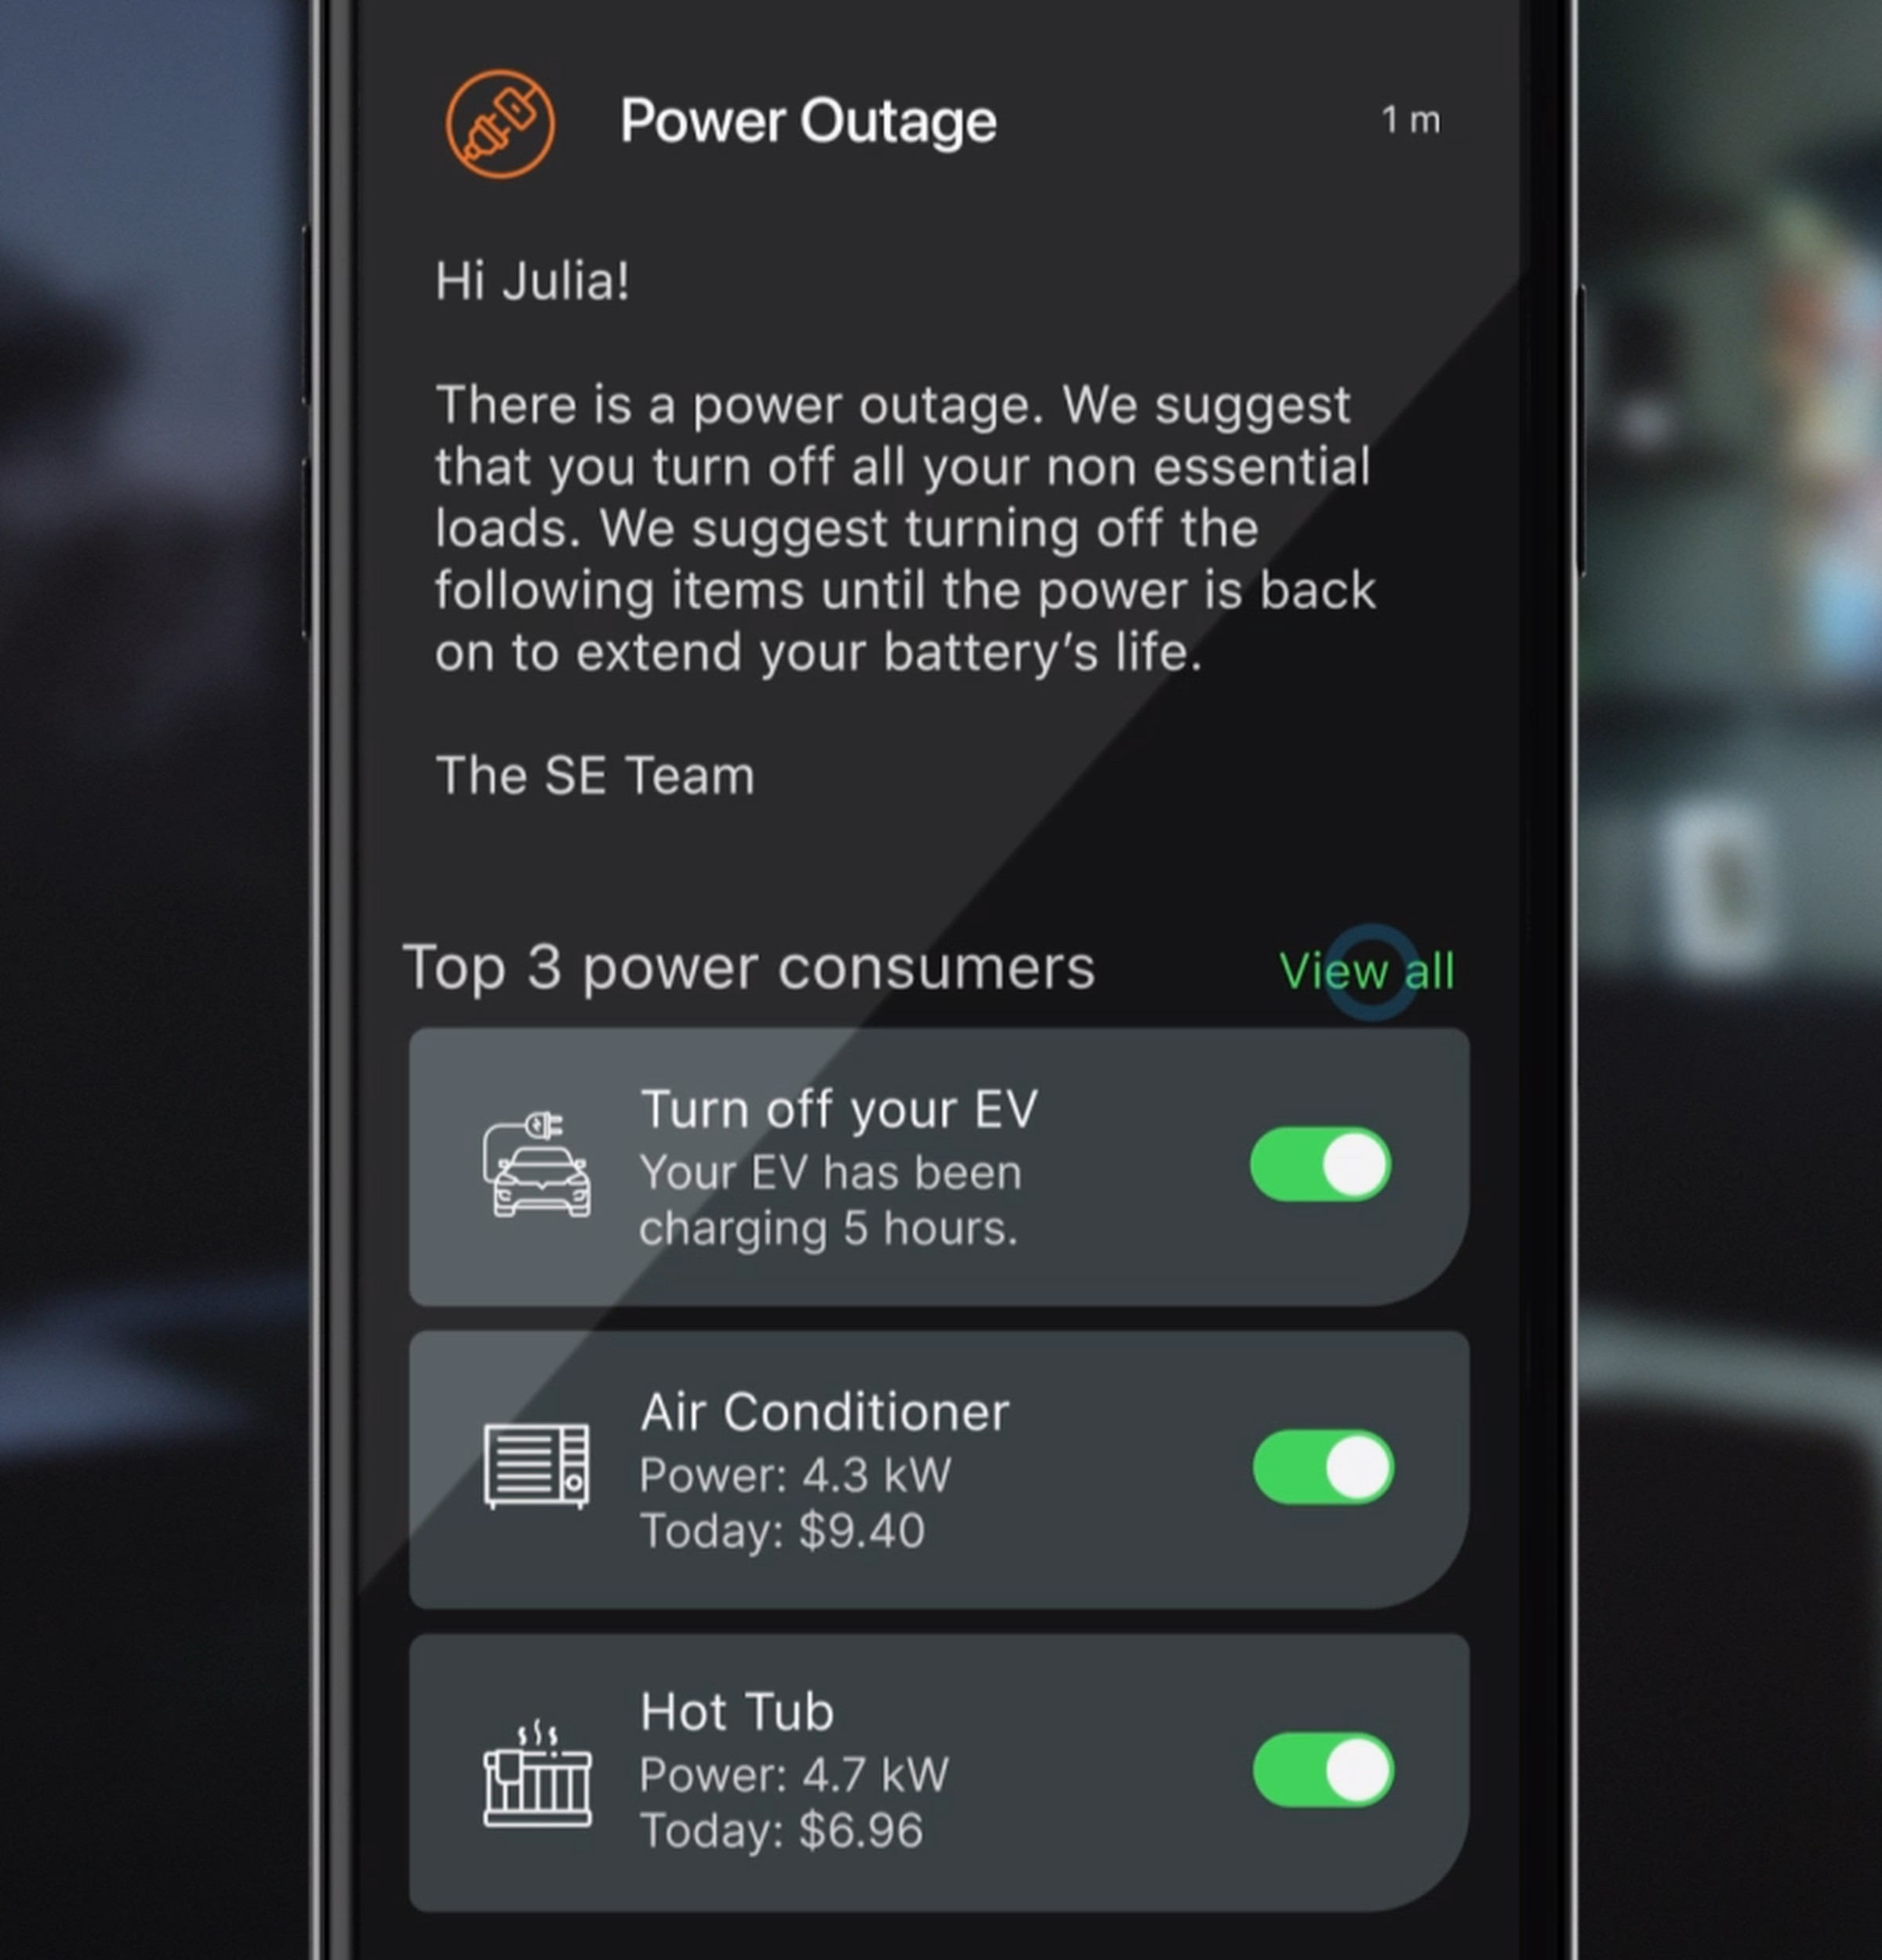 “Hi Julia! There is a power outage. We suggest that you turn off all your non-essential loads”, reads the notification. It then tells her which are the top power consumers and offers switches.